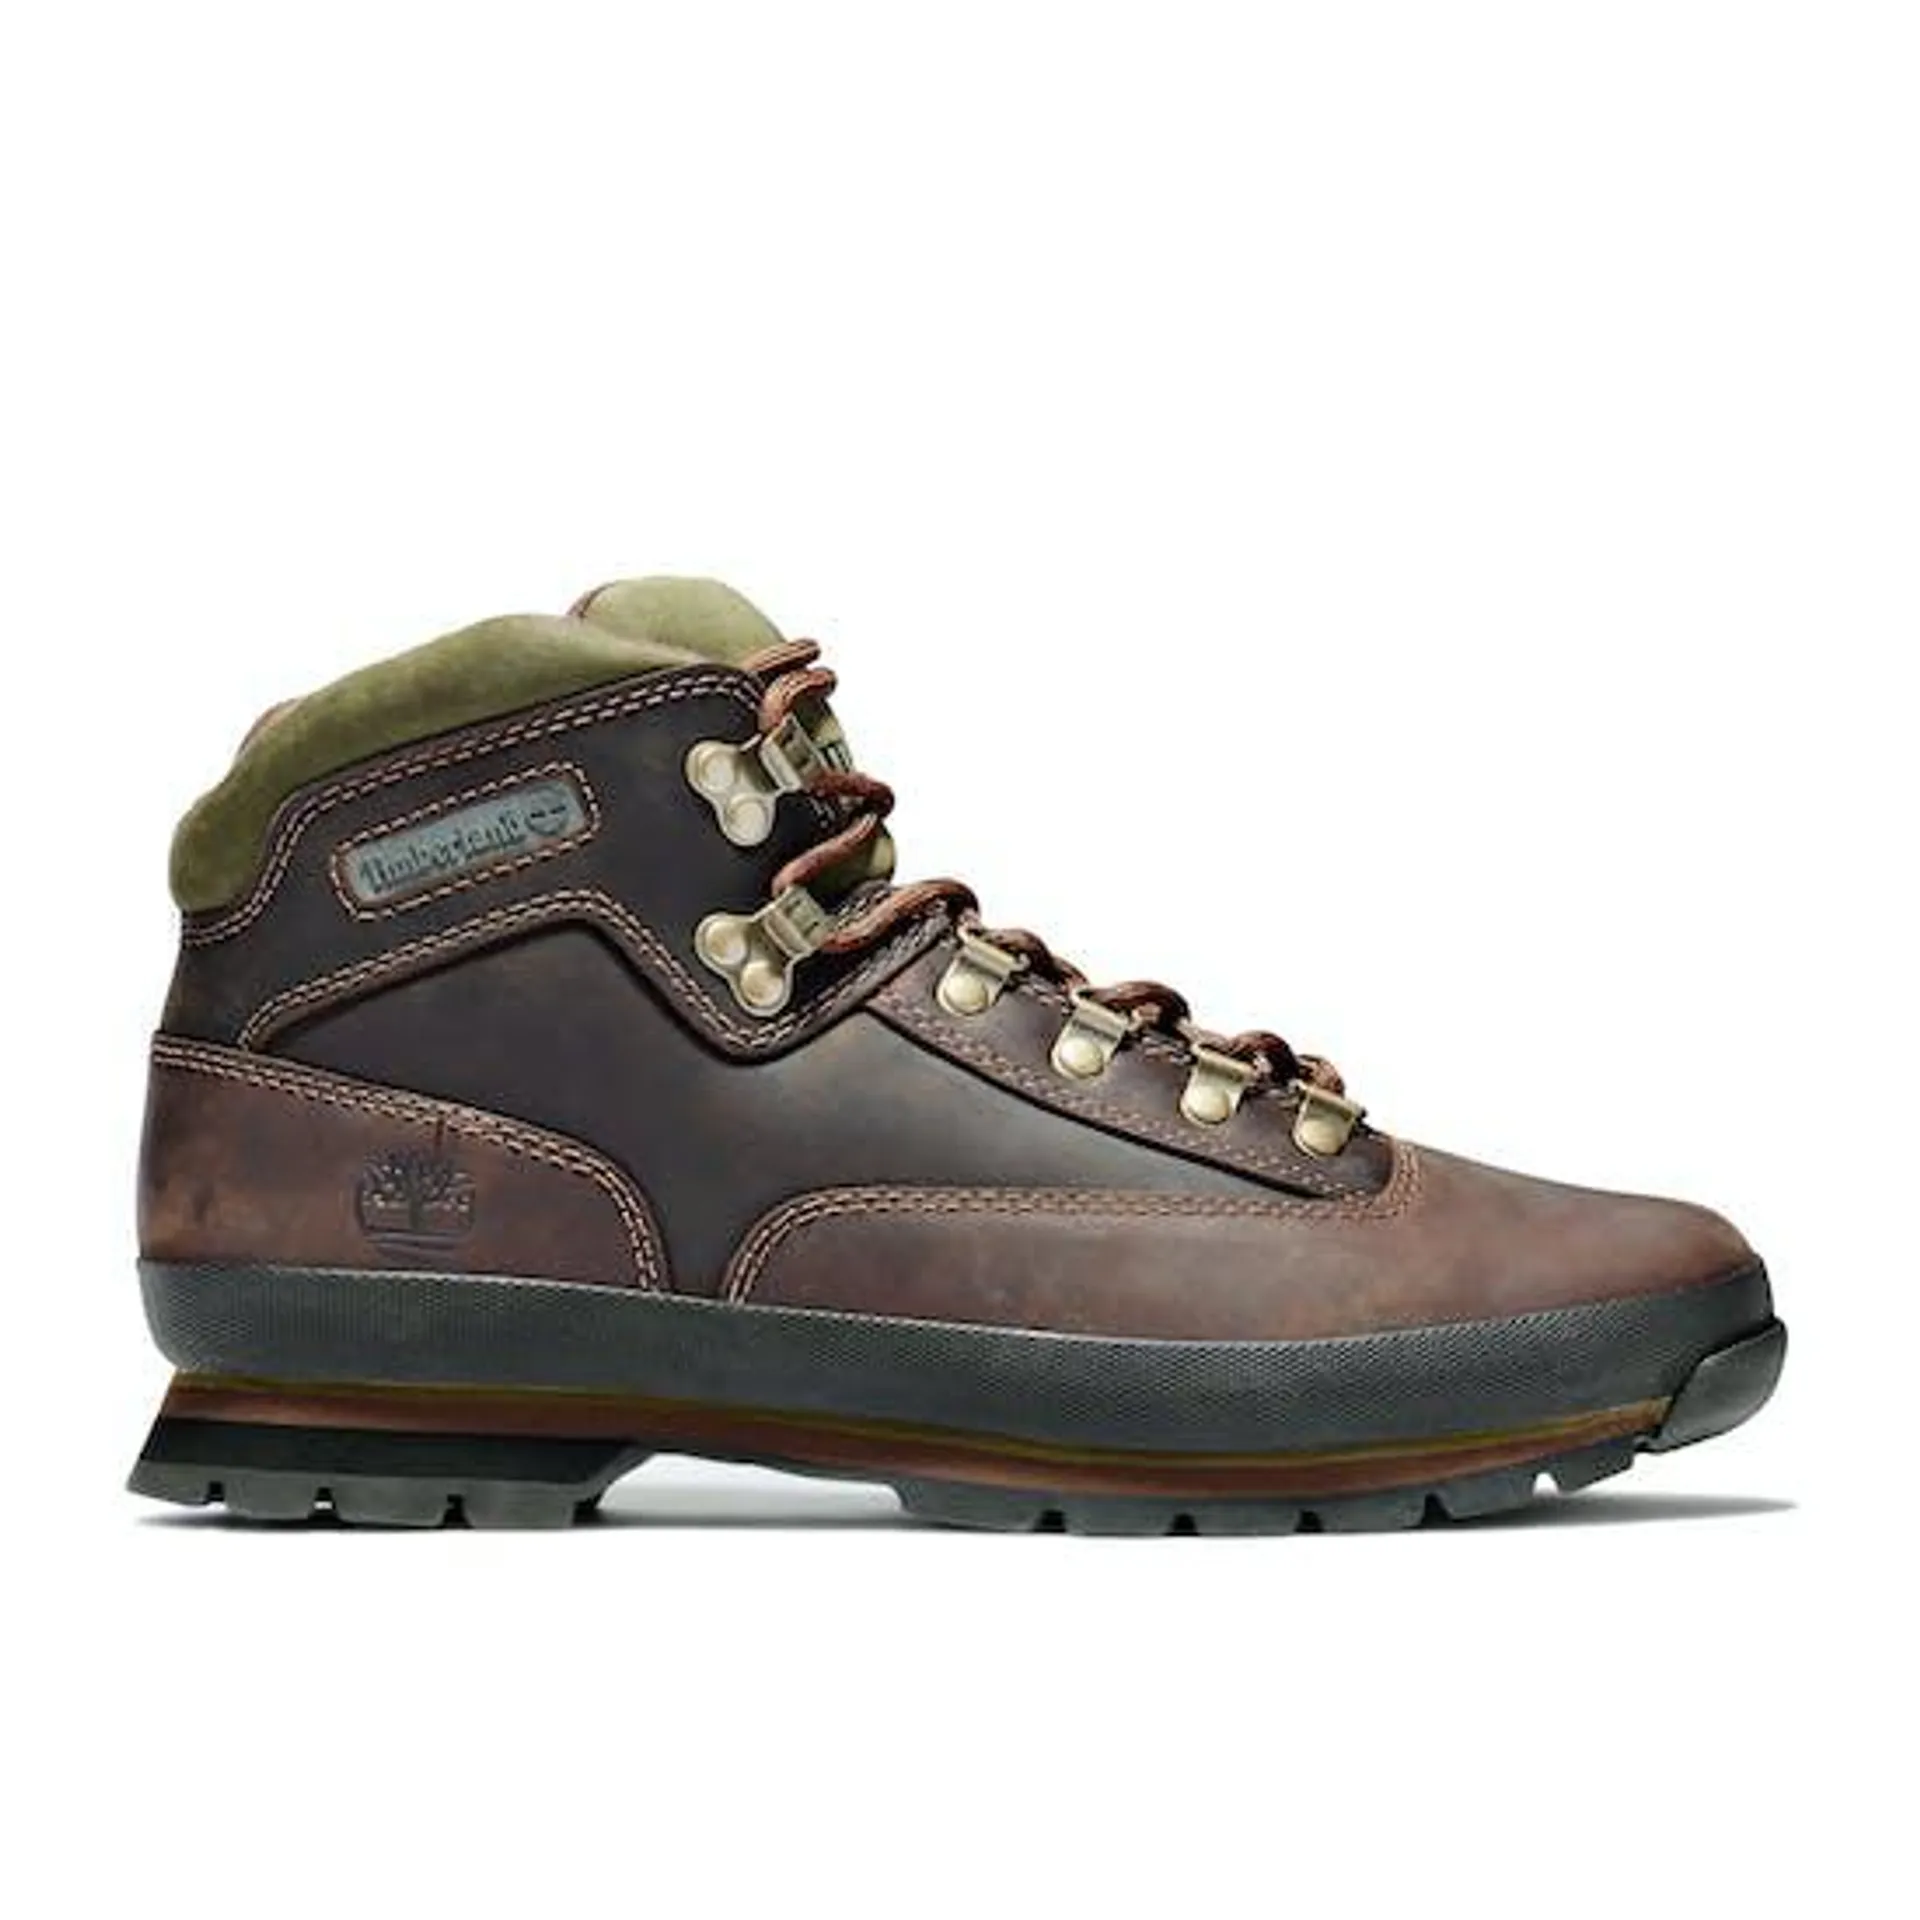 Timberland Euro Hiker Leather Walking Boots